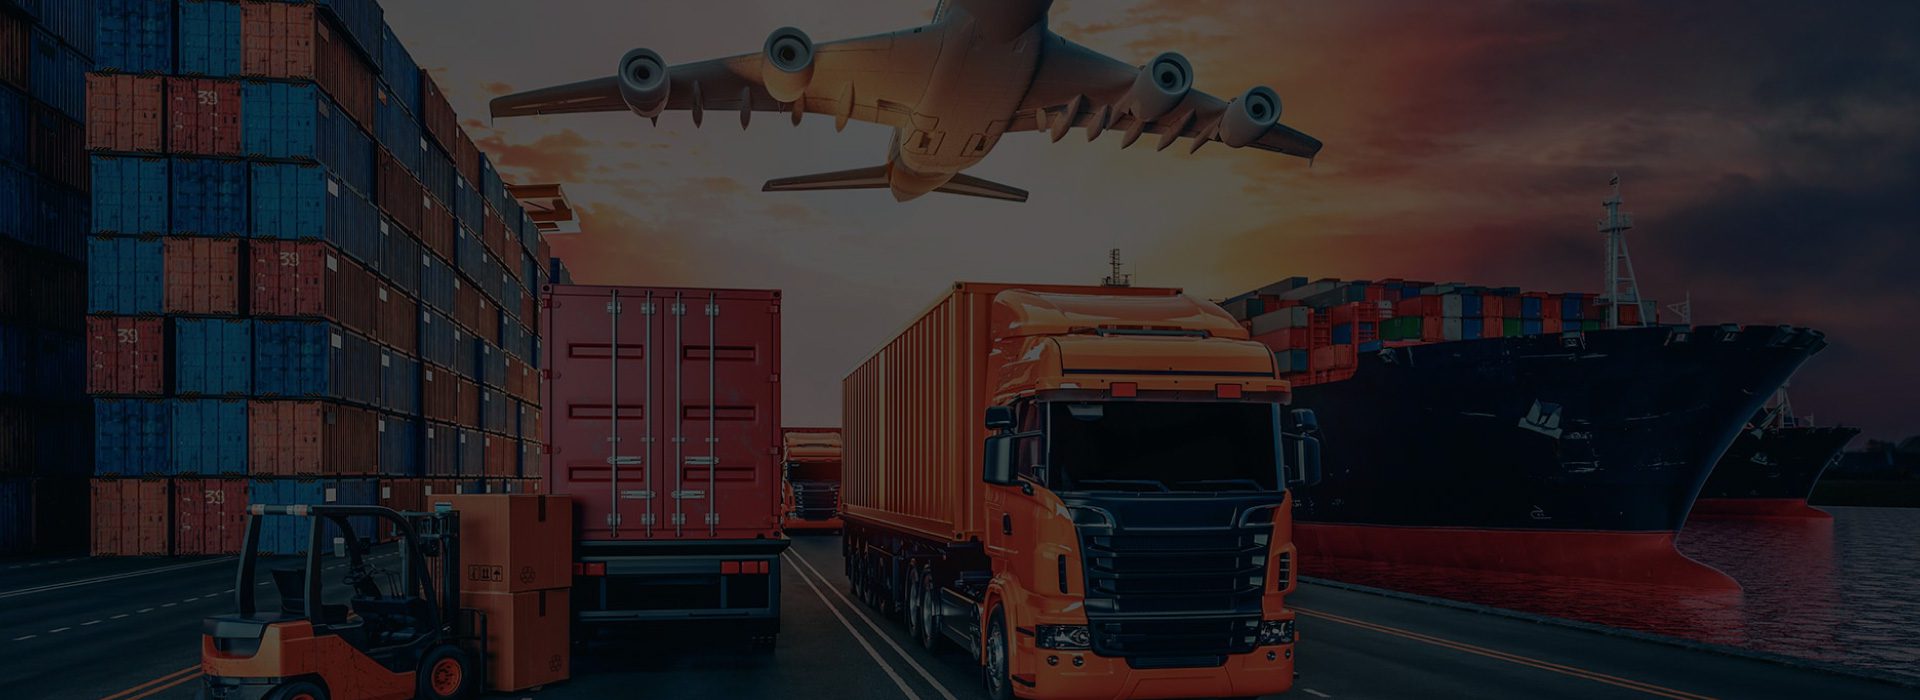 Smart logistic with iot fleet management system | Legacy iot